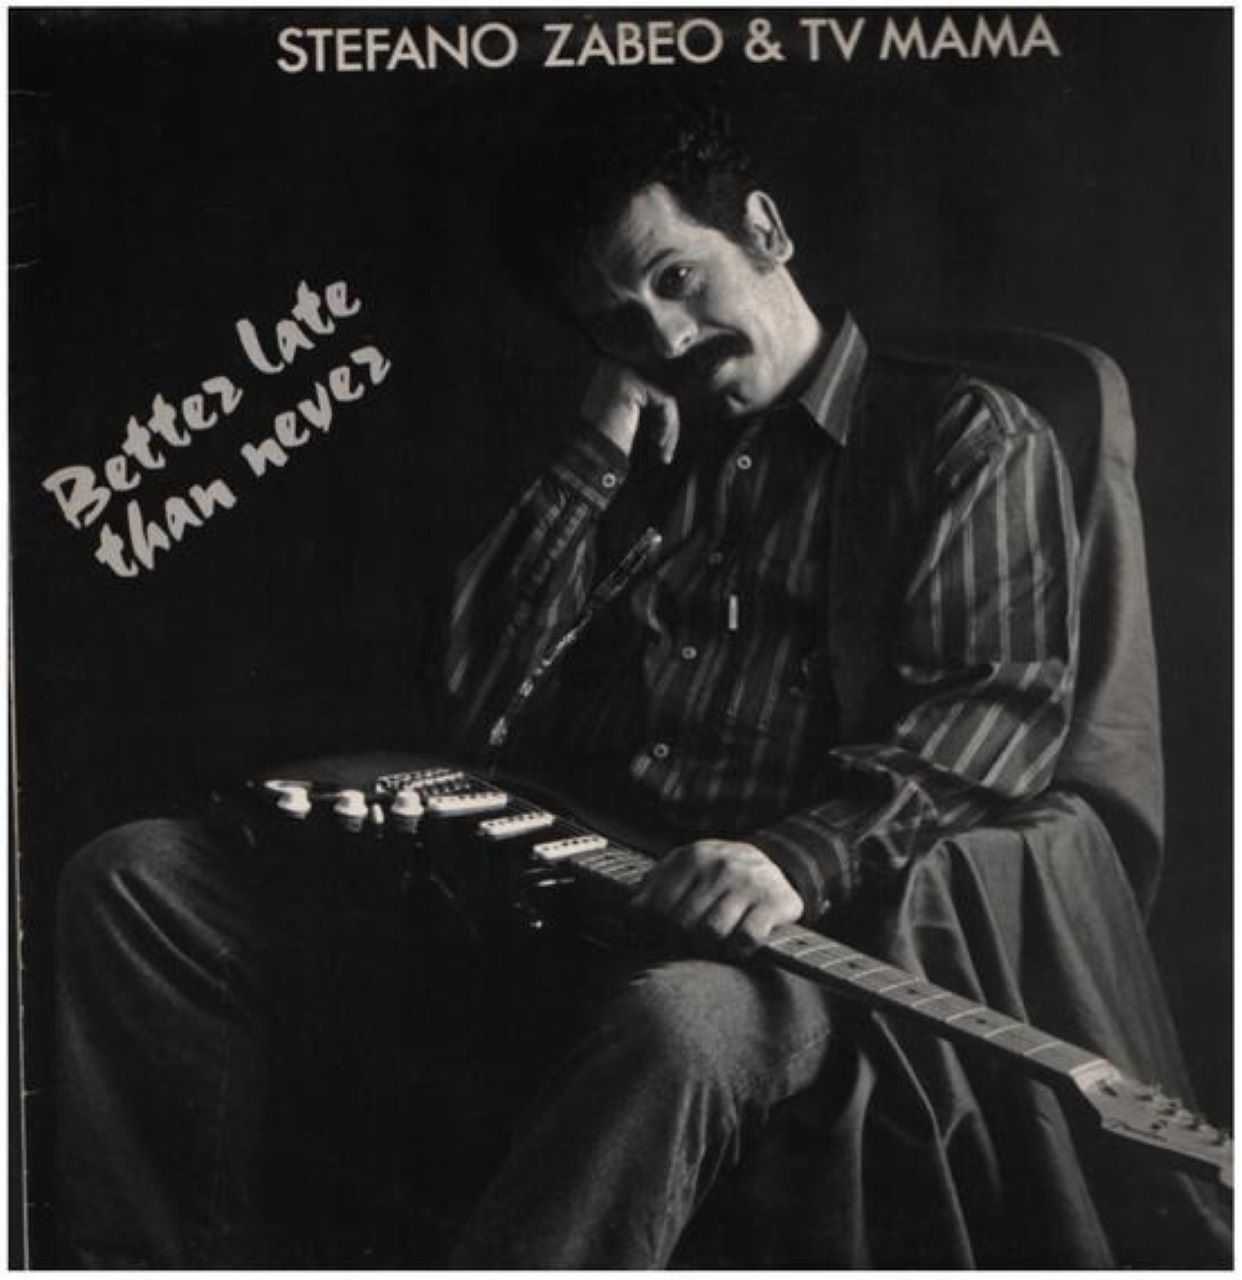 Stefano Zabeo - Better Late Than Never cover album